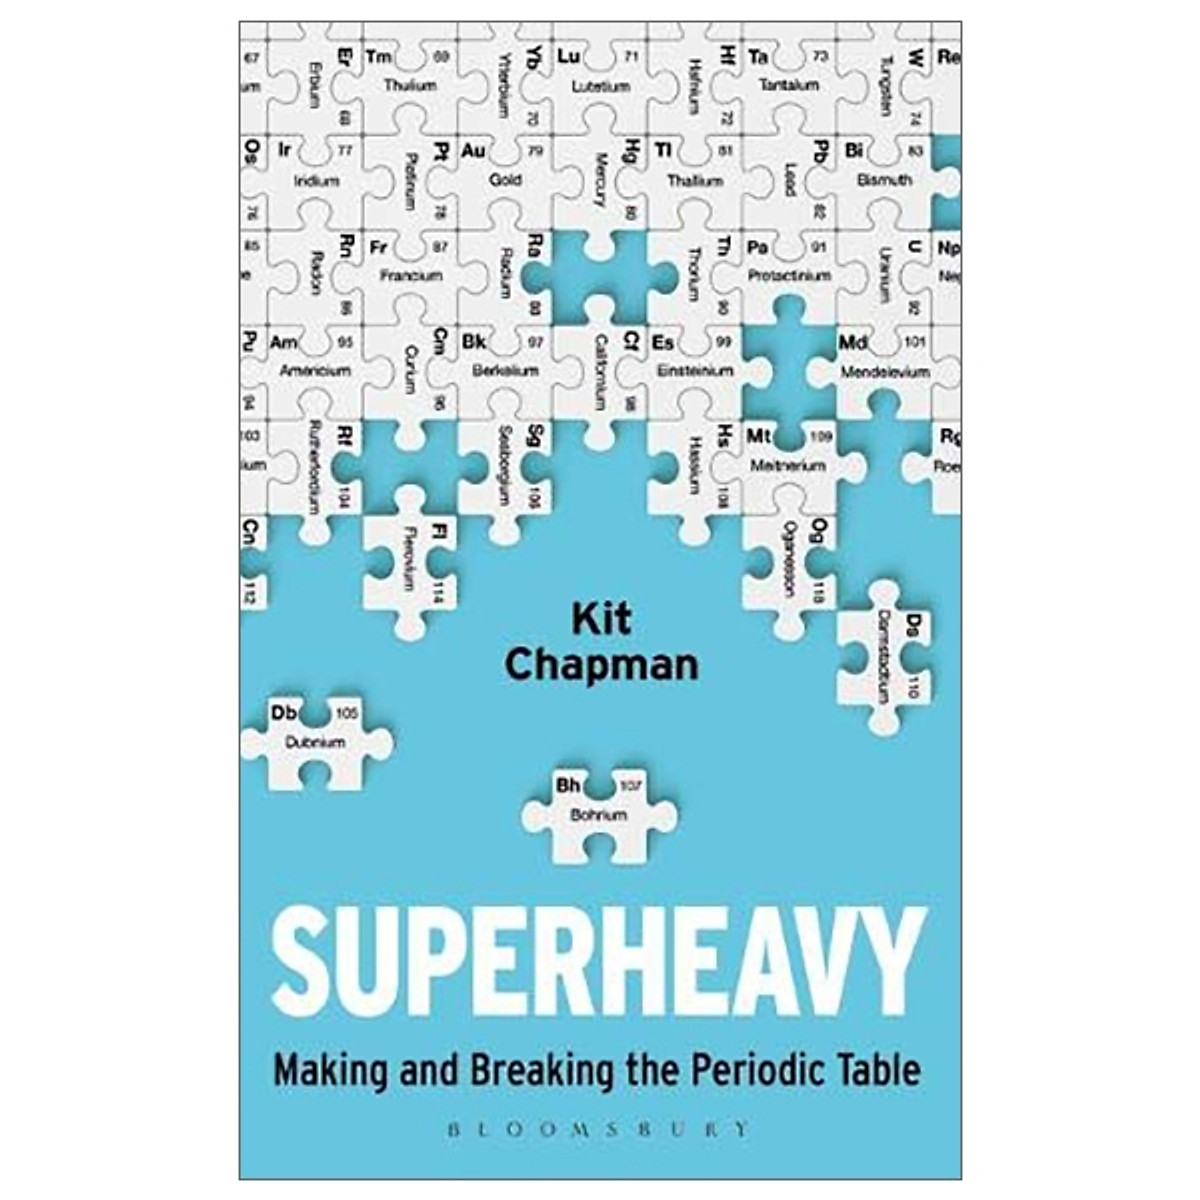 Superheavy: Making And Breaking The Periodic Table